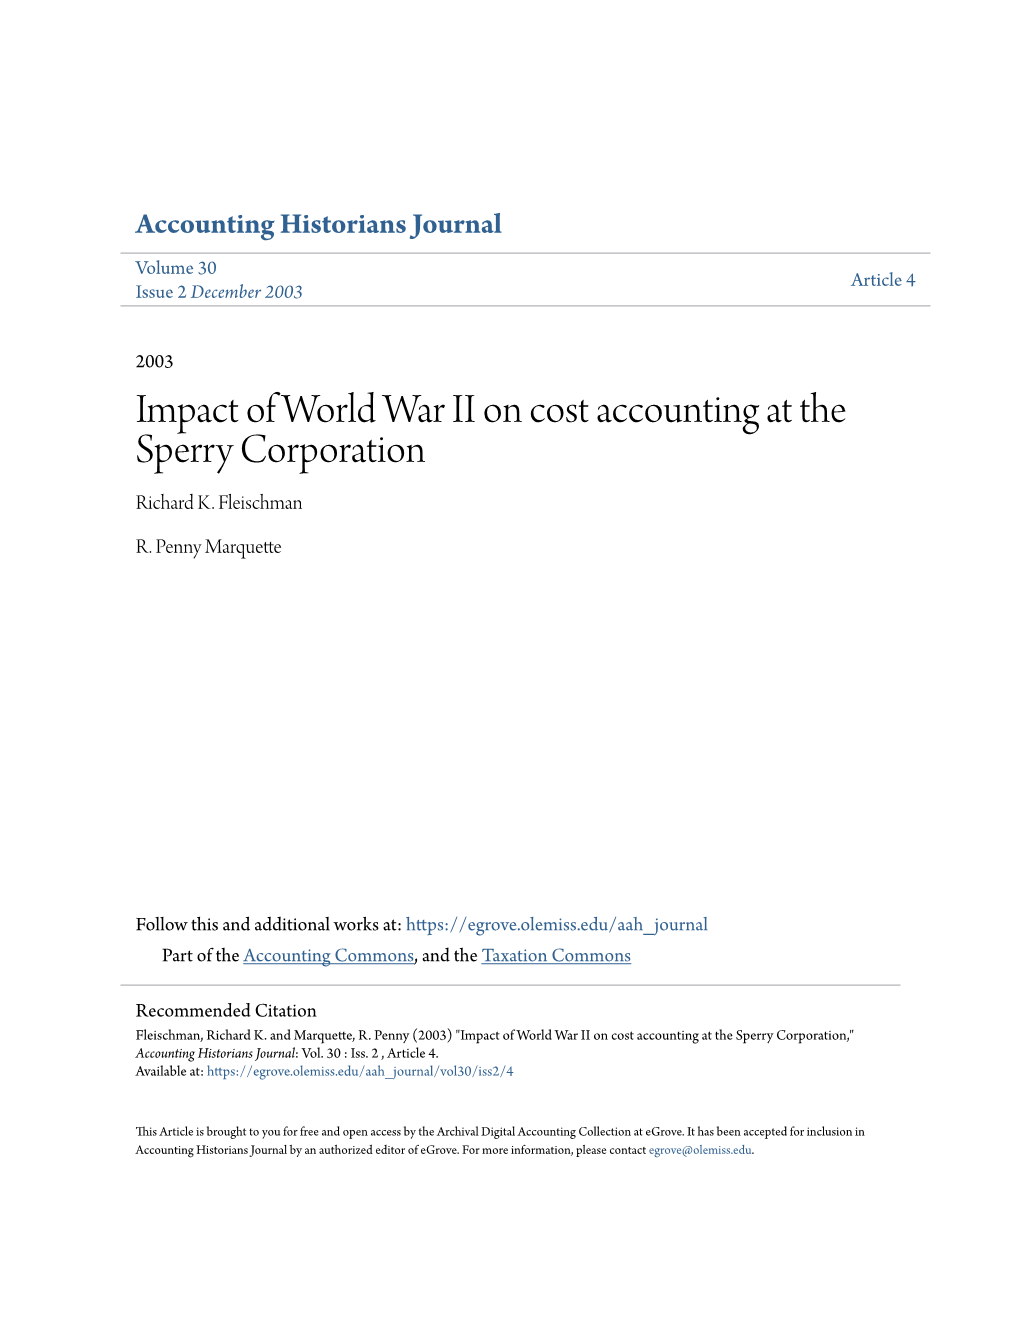 Impact of World War II on Cost Accounting at the Sperry Corporation Richard K